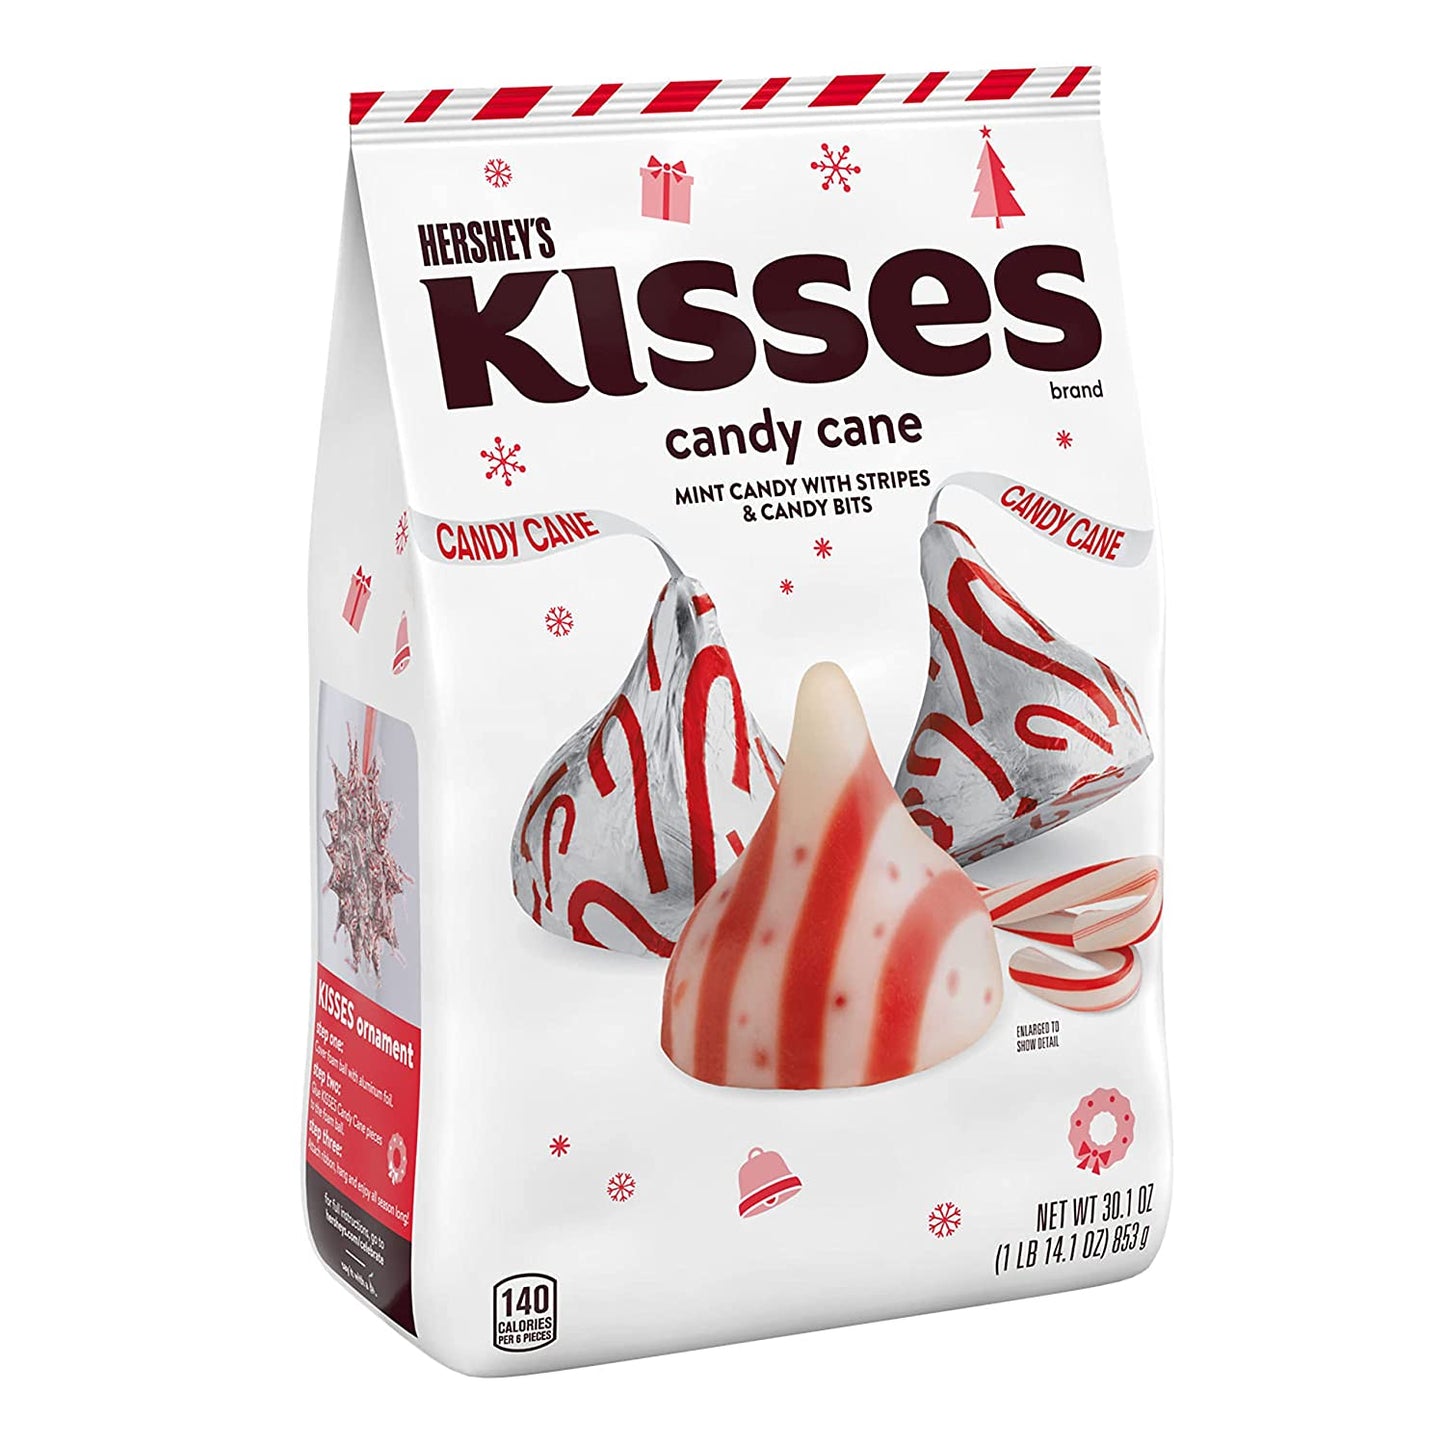 HERSHEY'S KISSES Candy Cane Mint With Stripes and Candy Bits Candy, Christmas, 30.1 oz Bulk Bag